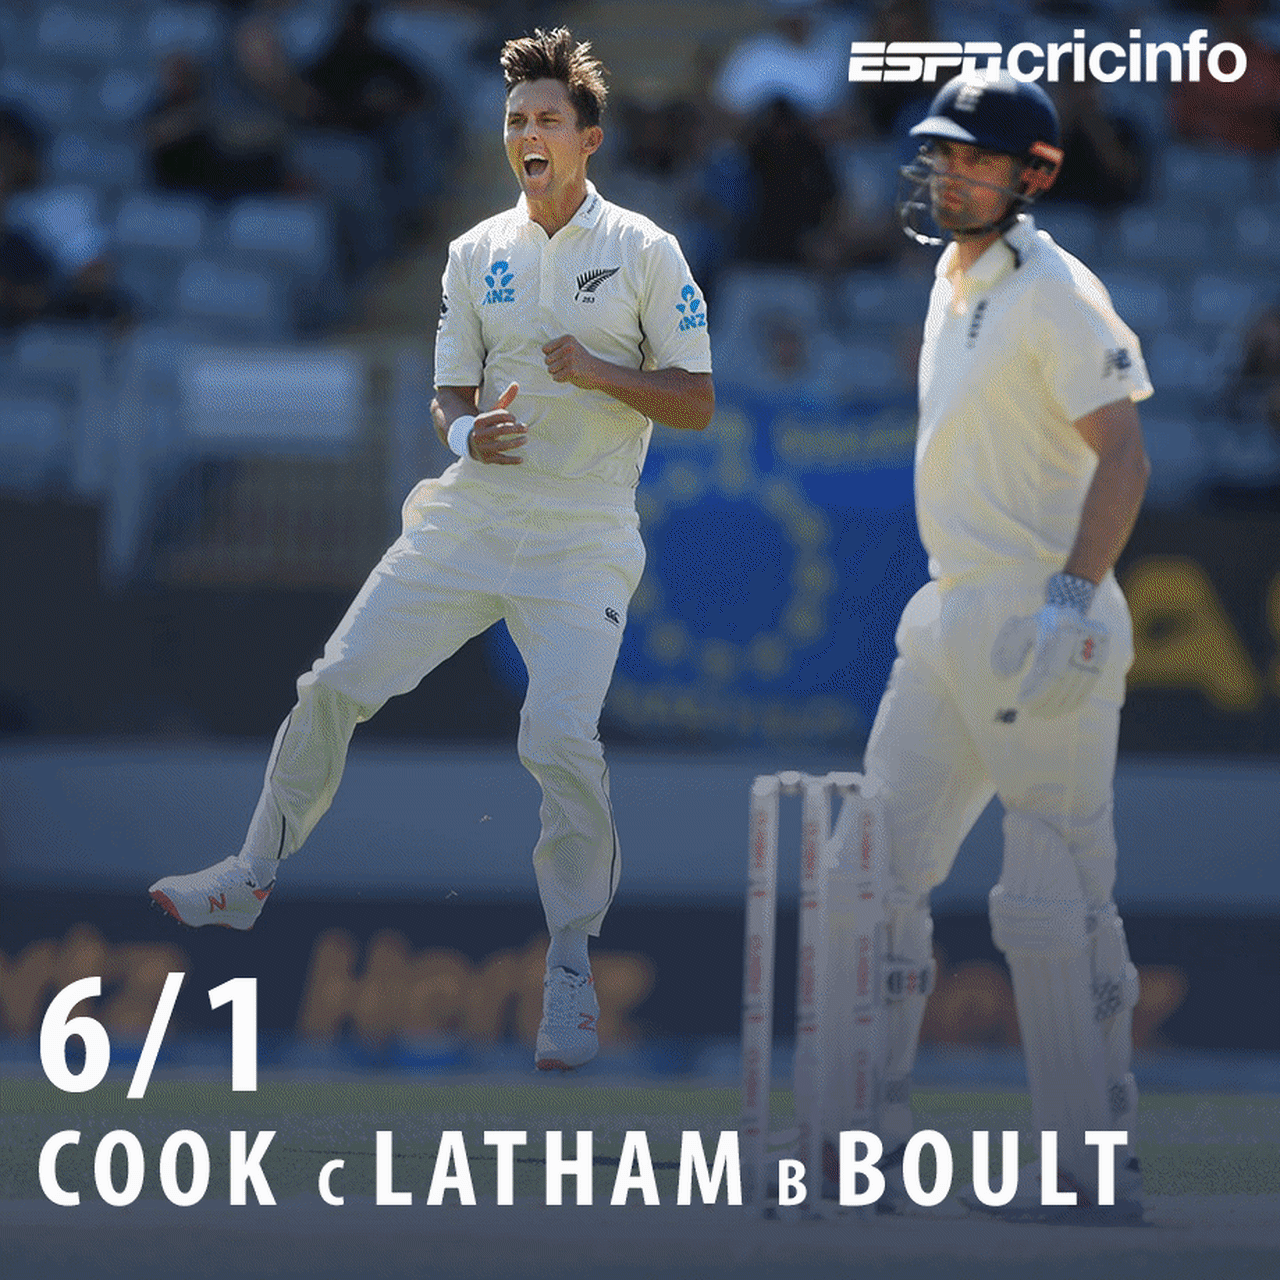 Boult and Southee combined to skittle England out for 58 all out on Day 1